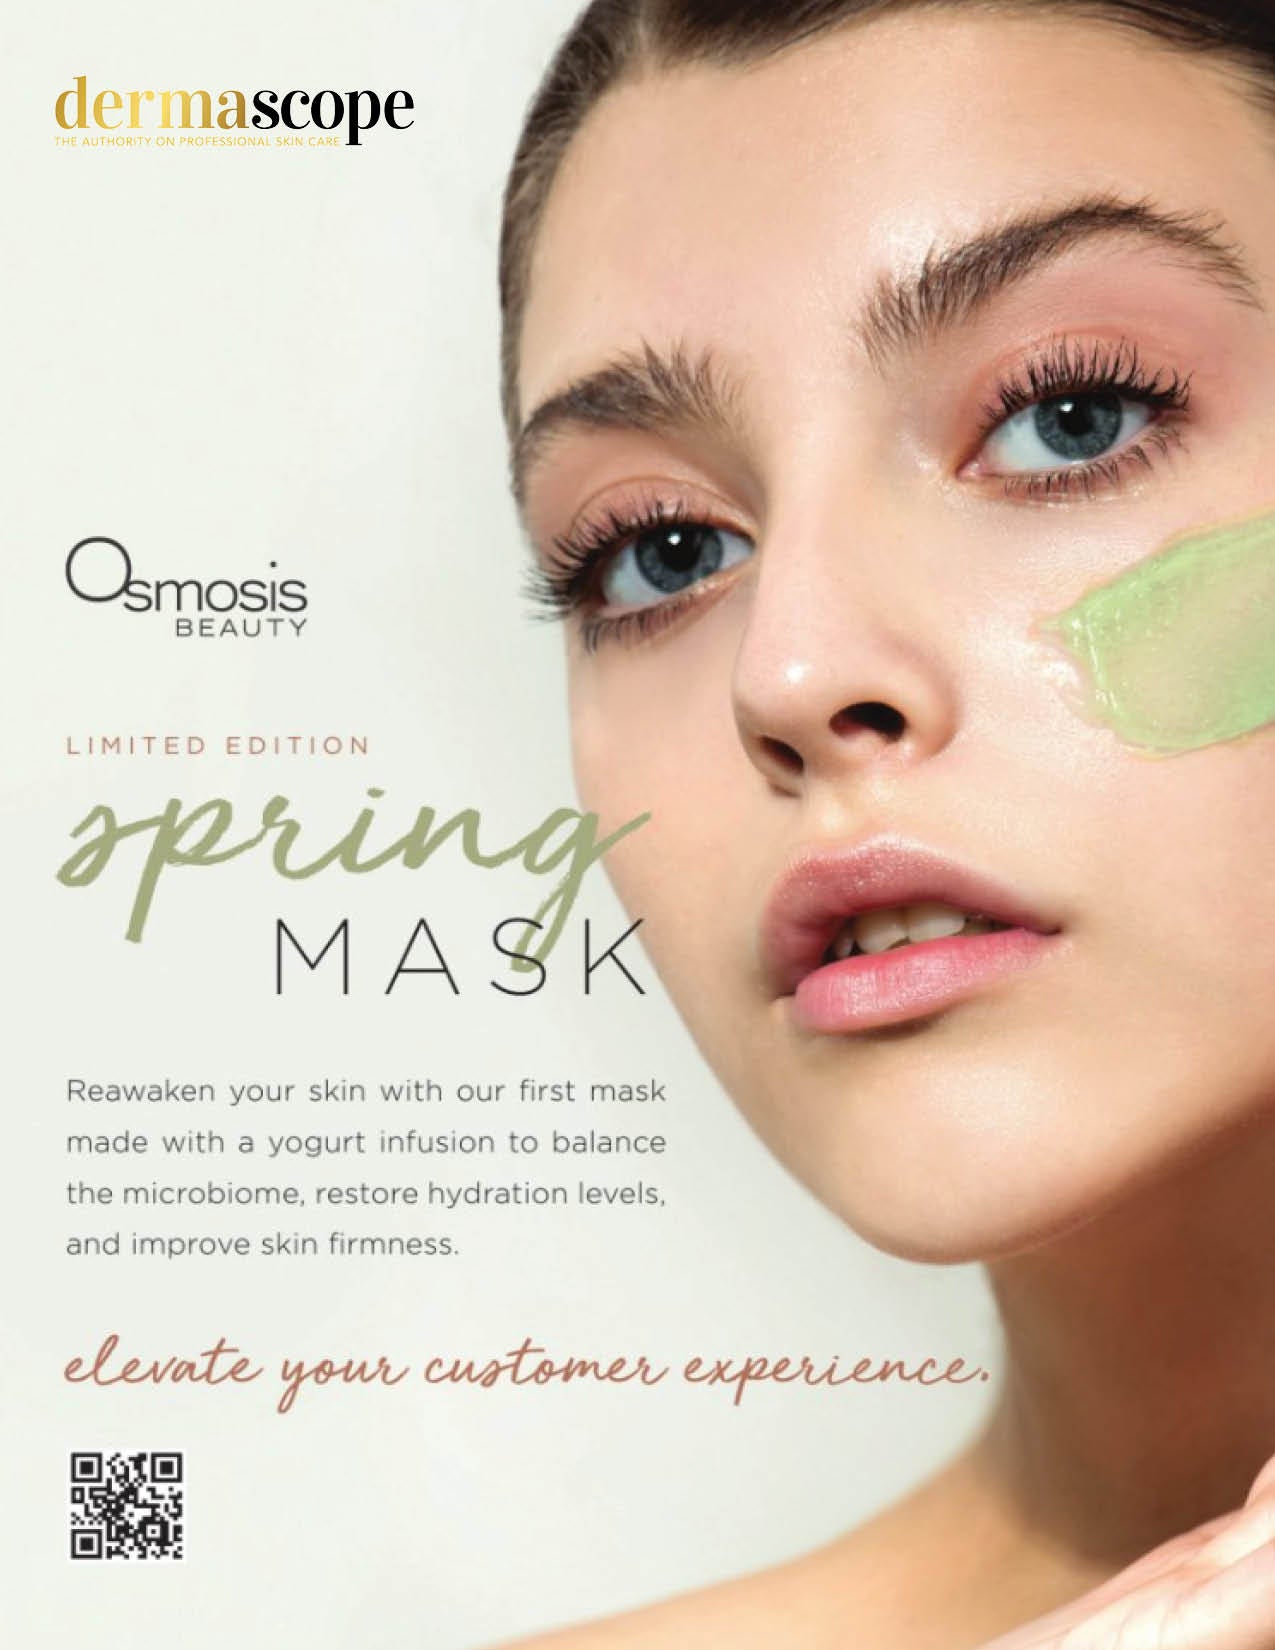 Dermascope features Osmosis Beauty Spring Mask